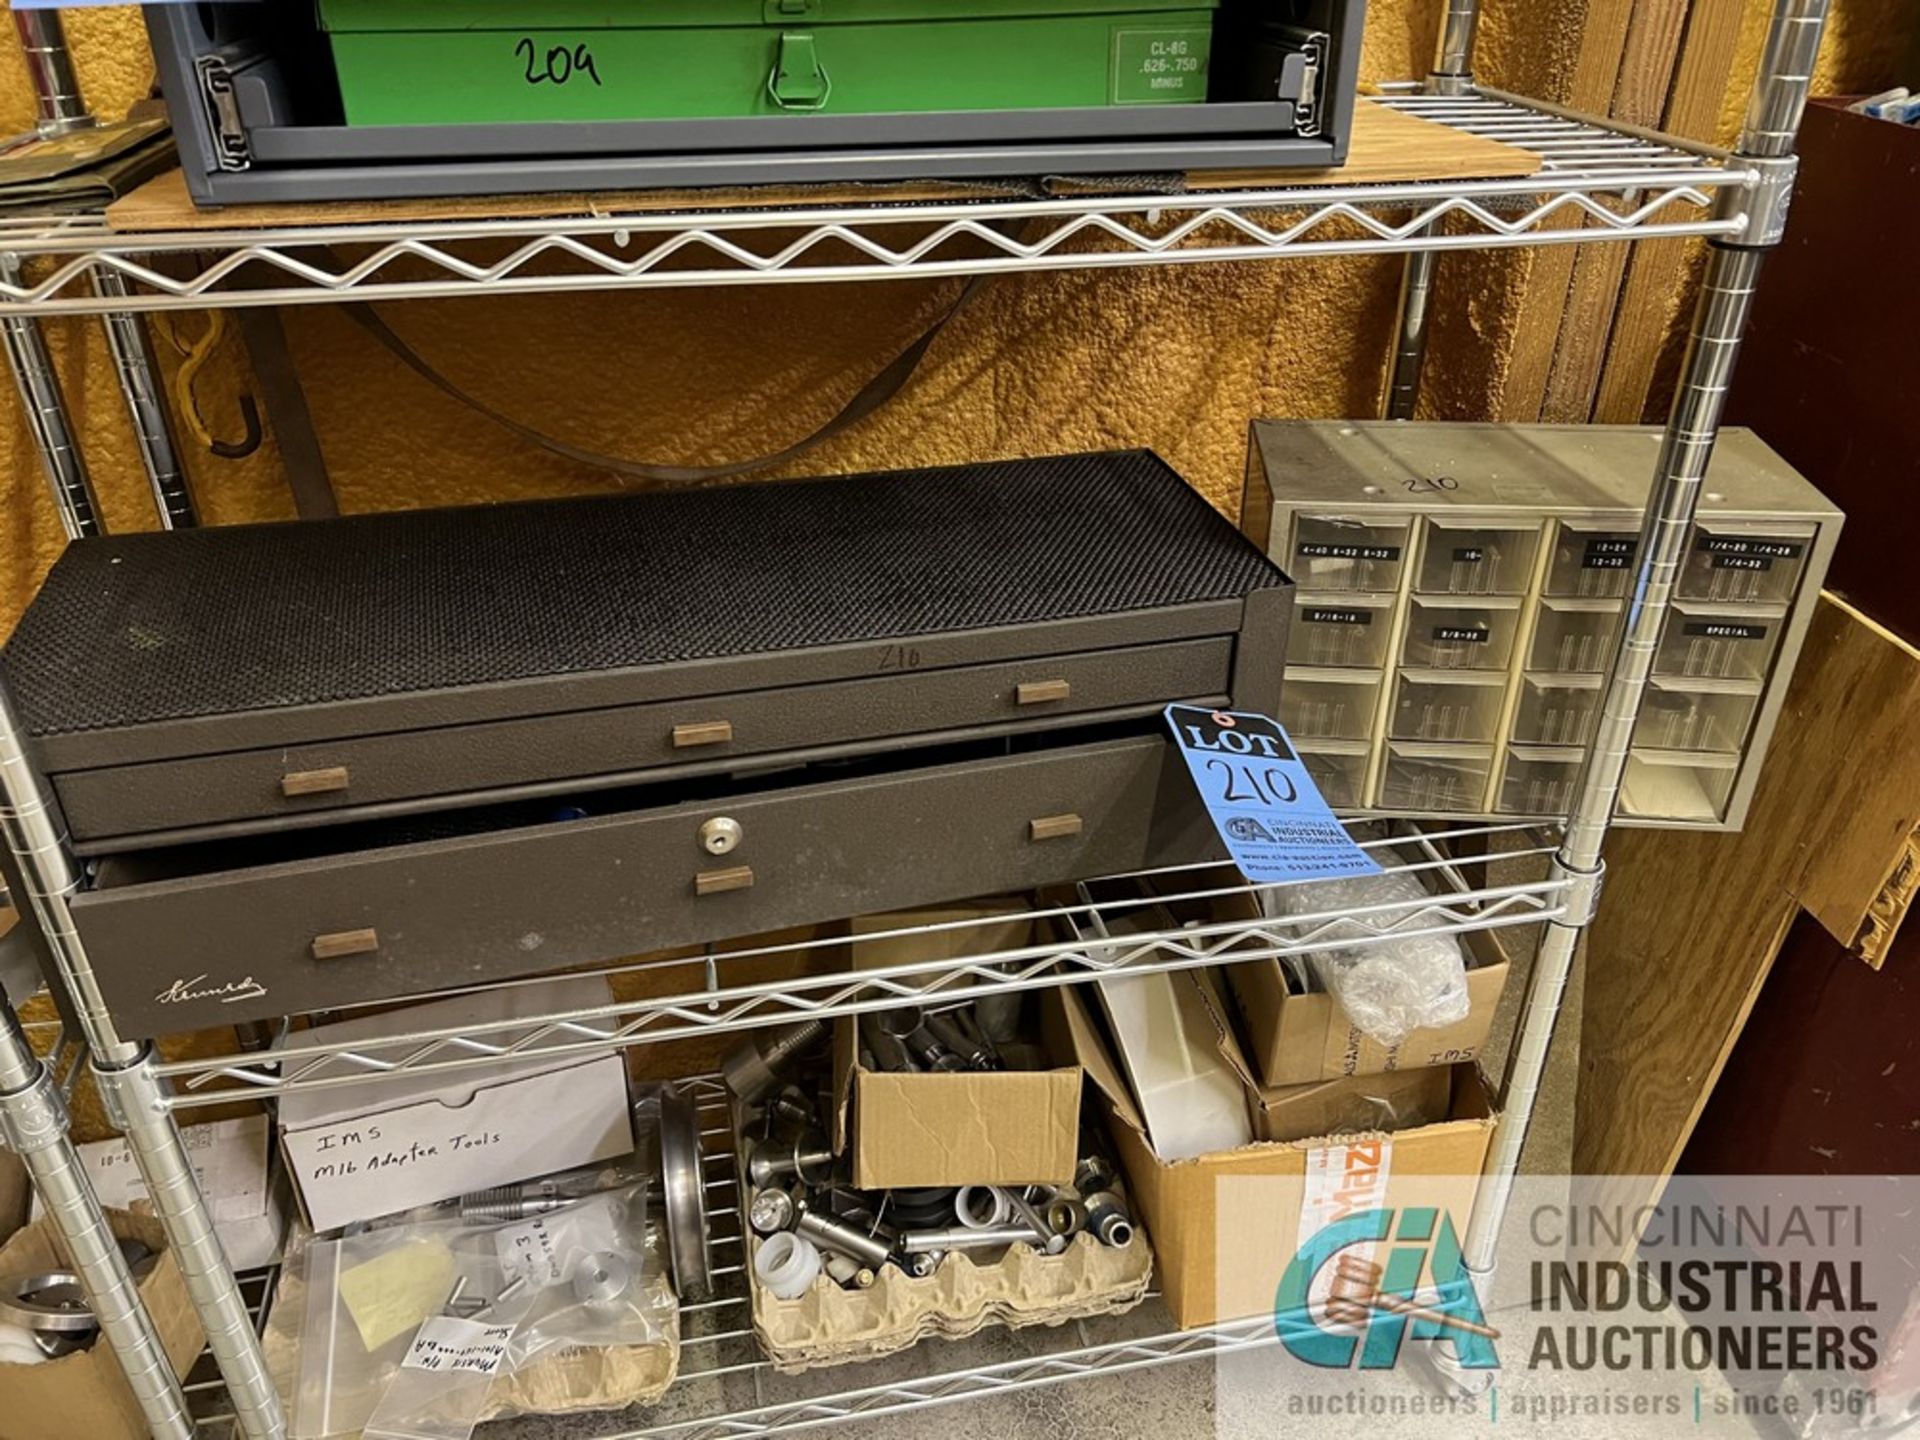 KENNEDY TOOLBOX AND PIGEON HOLE CABINET WITH RING AND THREAD GAGES